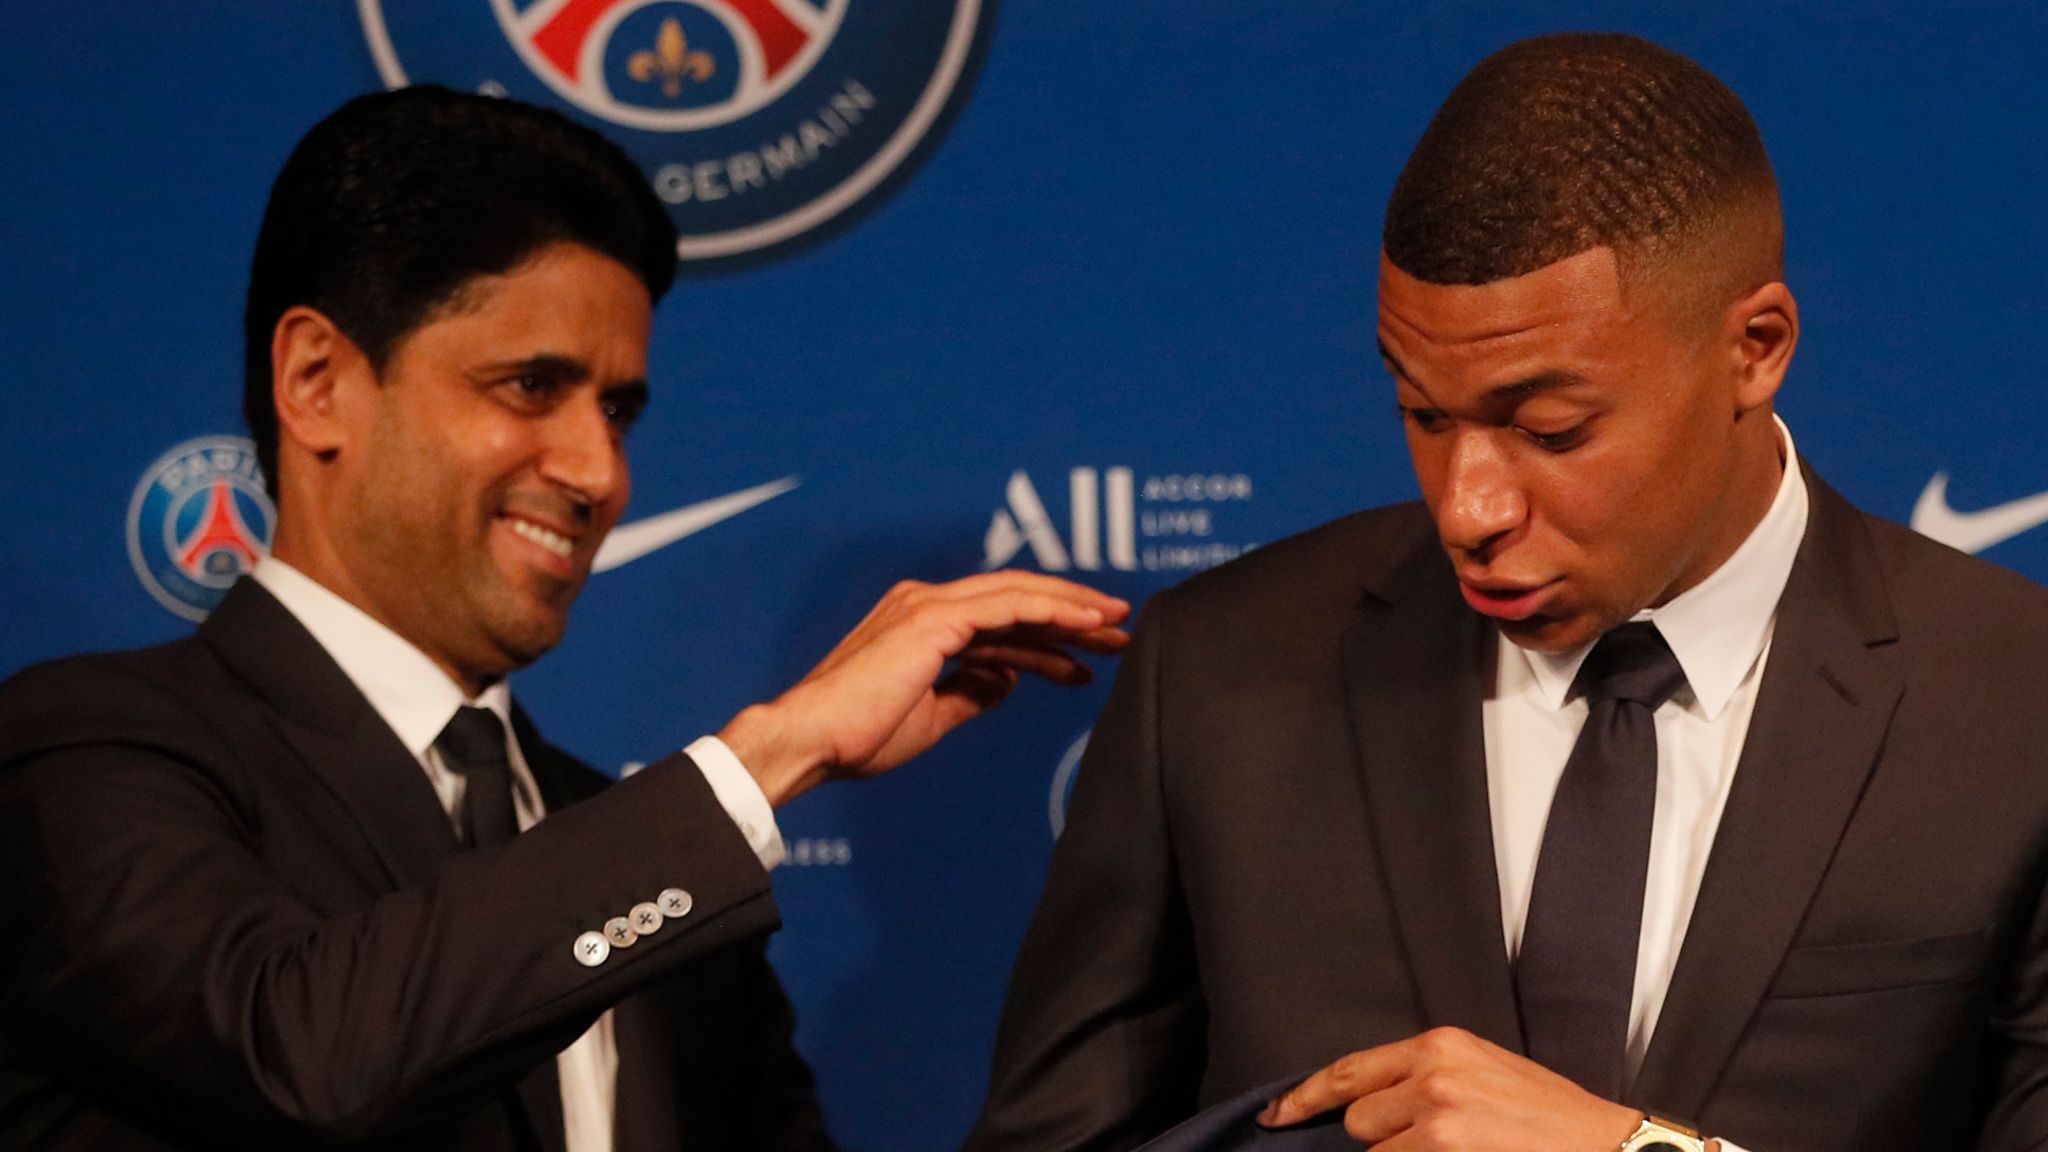 They aren't influenced by money” – Nasser Al-Khelaifi opens up on turning  down €180 million Real Madrid offer after trusting Mbappe and family on PSG  extension